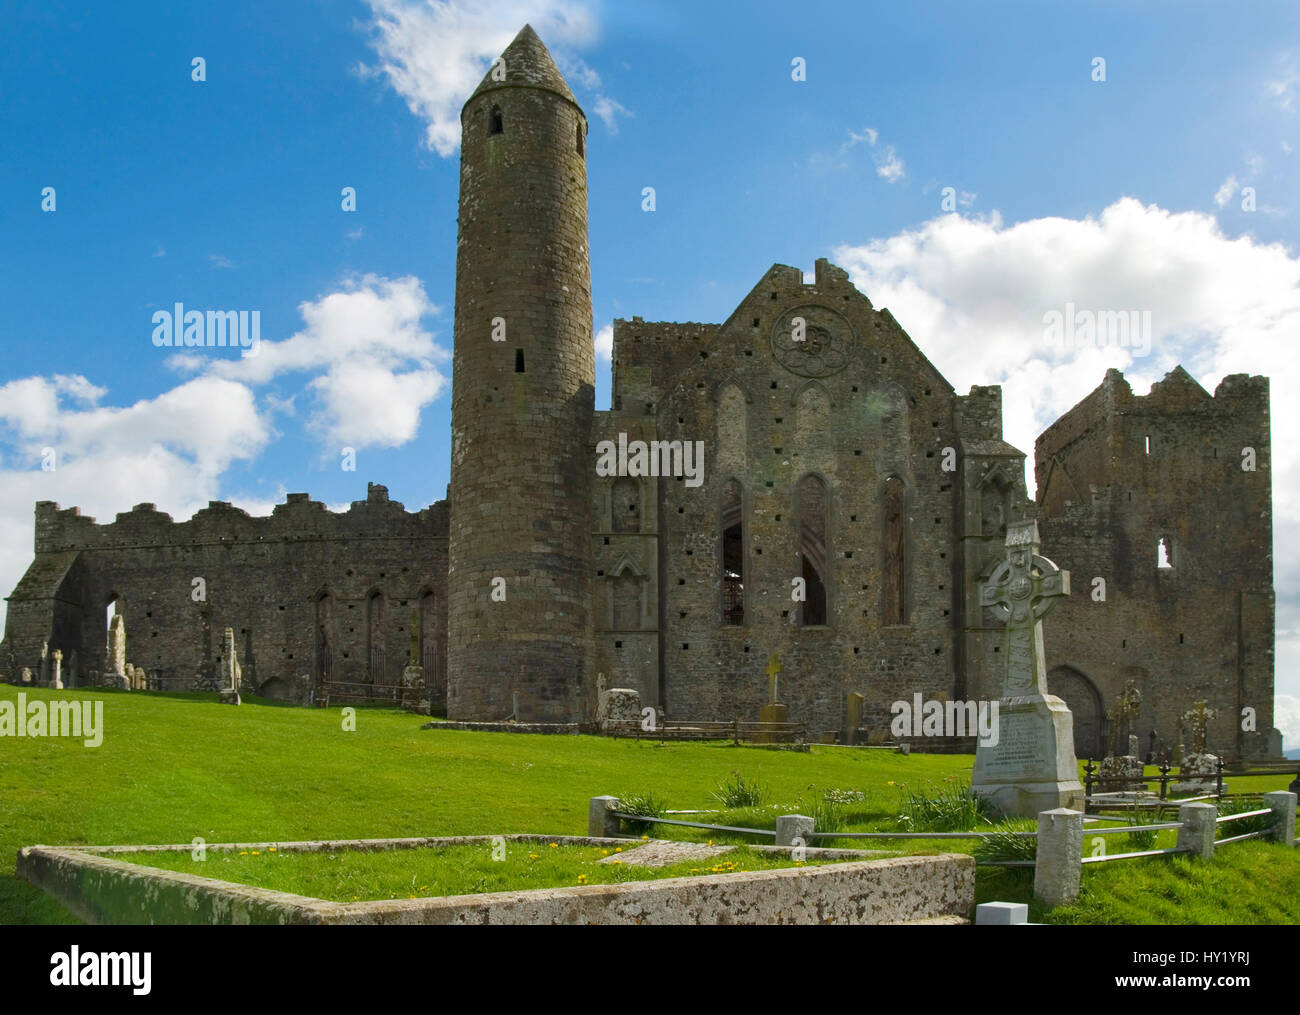 This stock photo shows the wellknown Irish castle Rock of Cashel. The image was taken on a sunny spring afternoon. Stock Photo